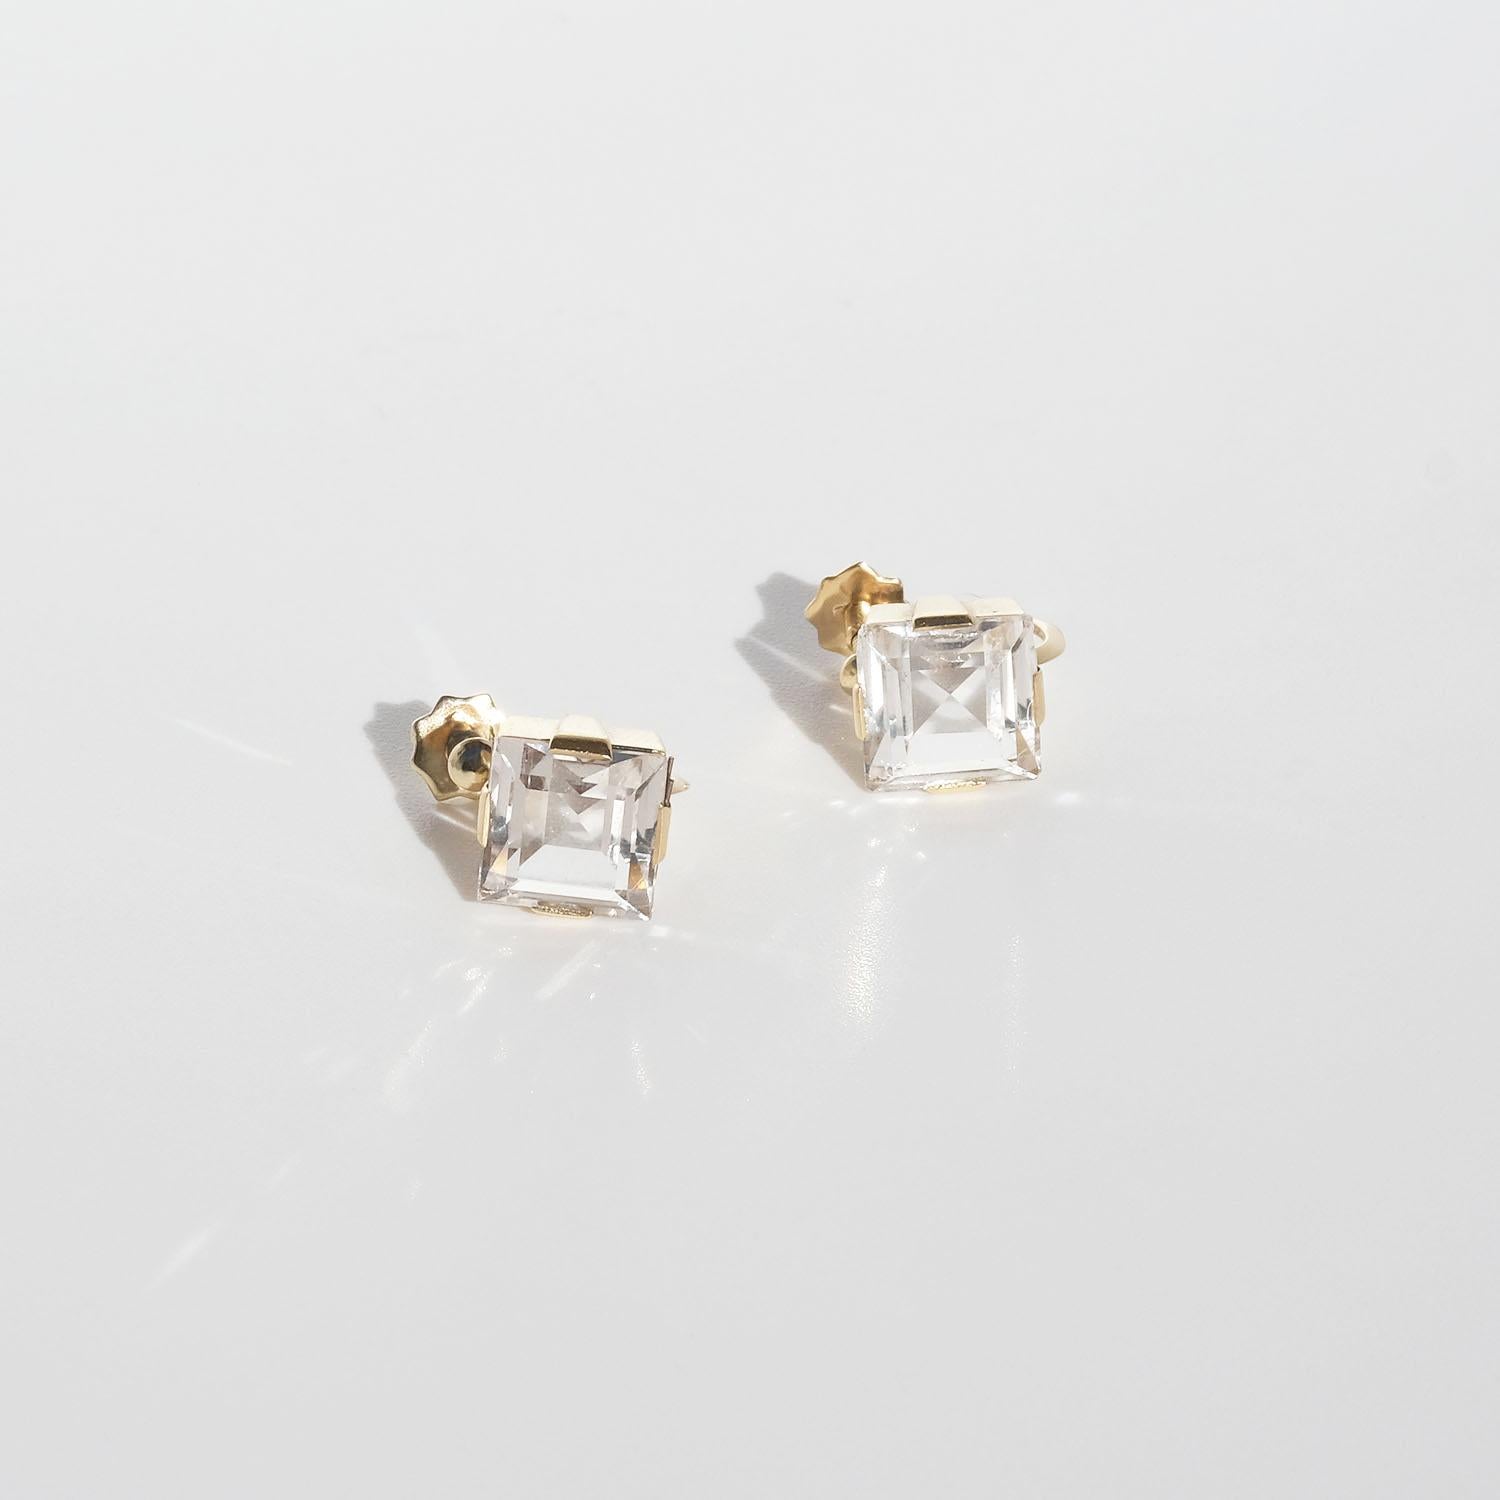 These 18k gold, carré cut rock crystal earrings have a feminine and classic shape. The earrings have so-called screw backs, like many of the earrings during the early 1900s through the 1950s had.

The best way to describe what these earrings convey